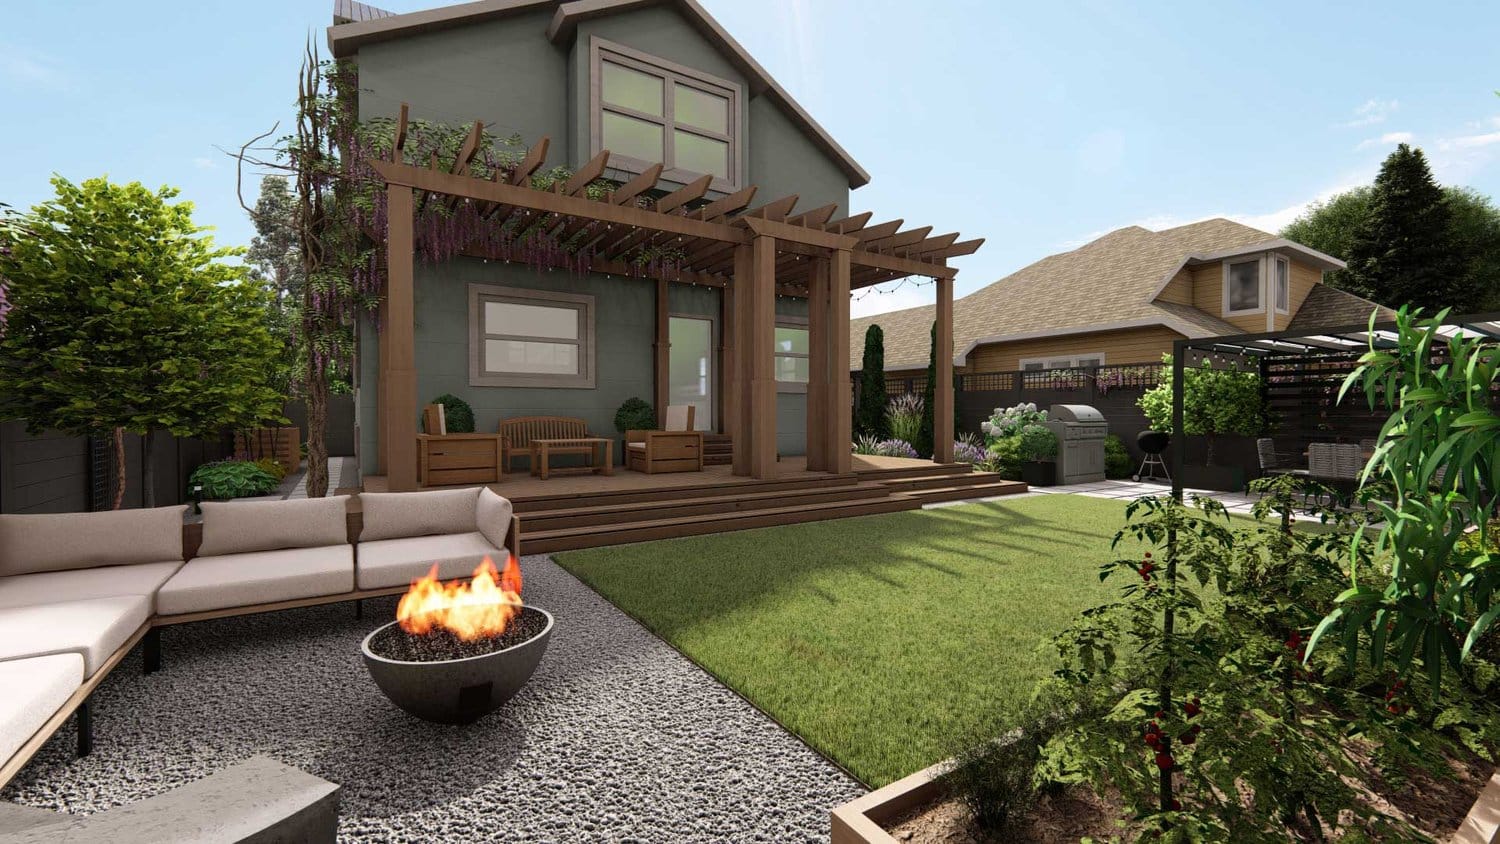 Bellevue Yard with trellis, lawn, sitting area on gravel and a fire pit